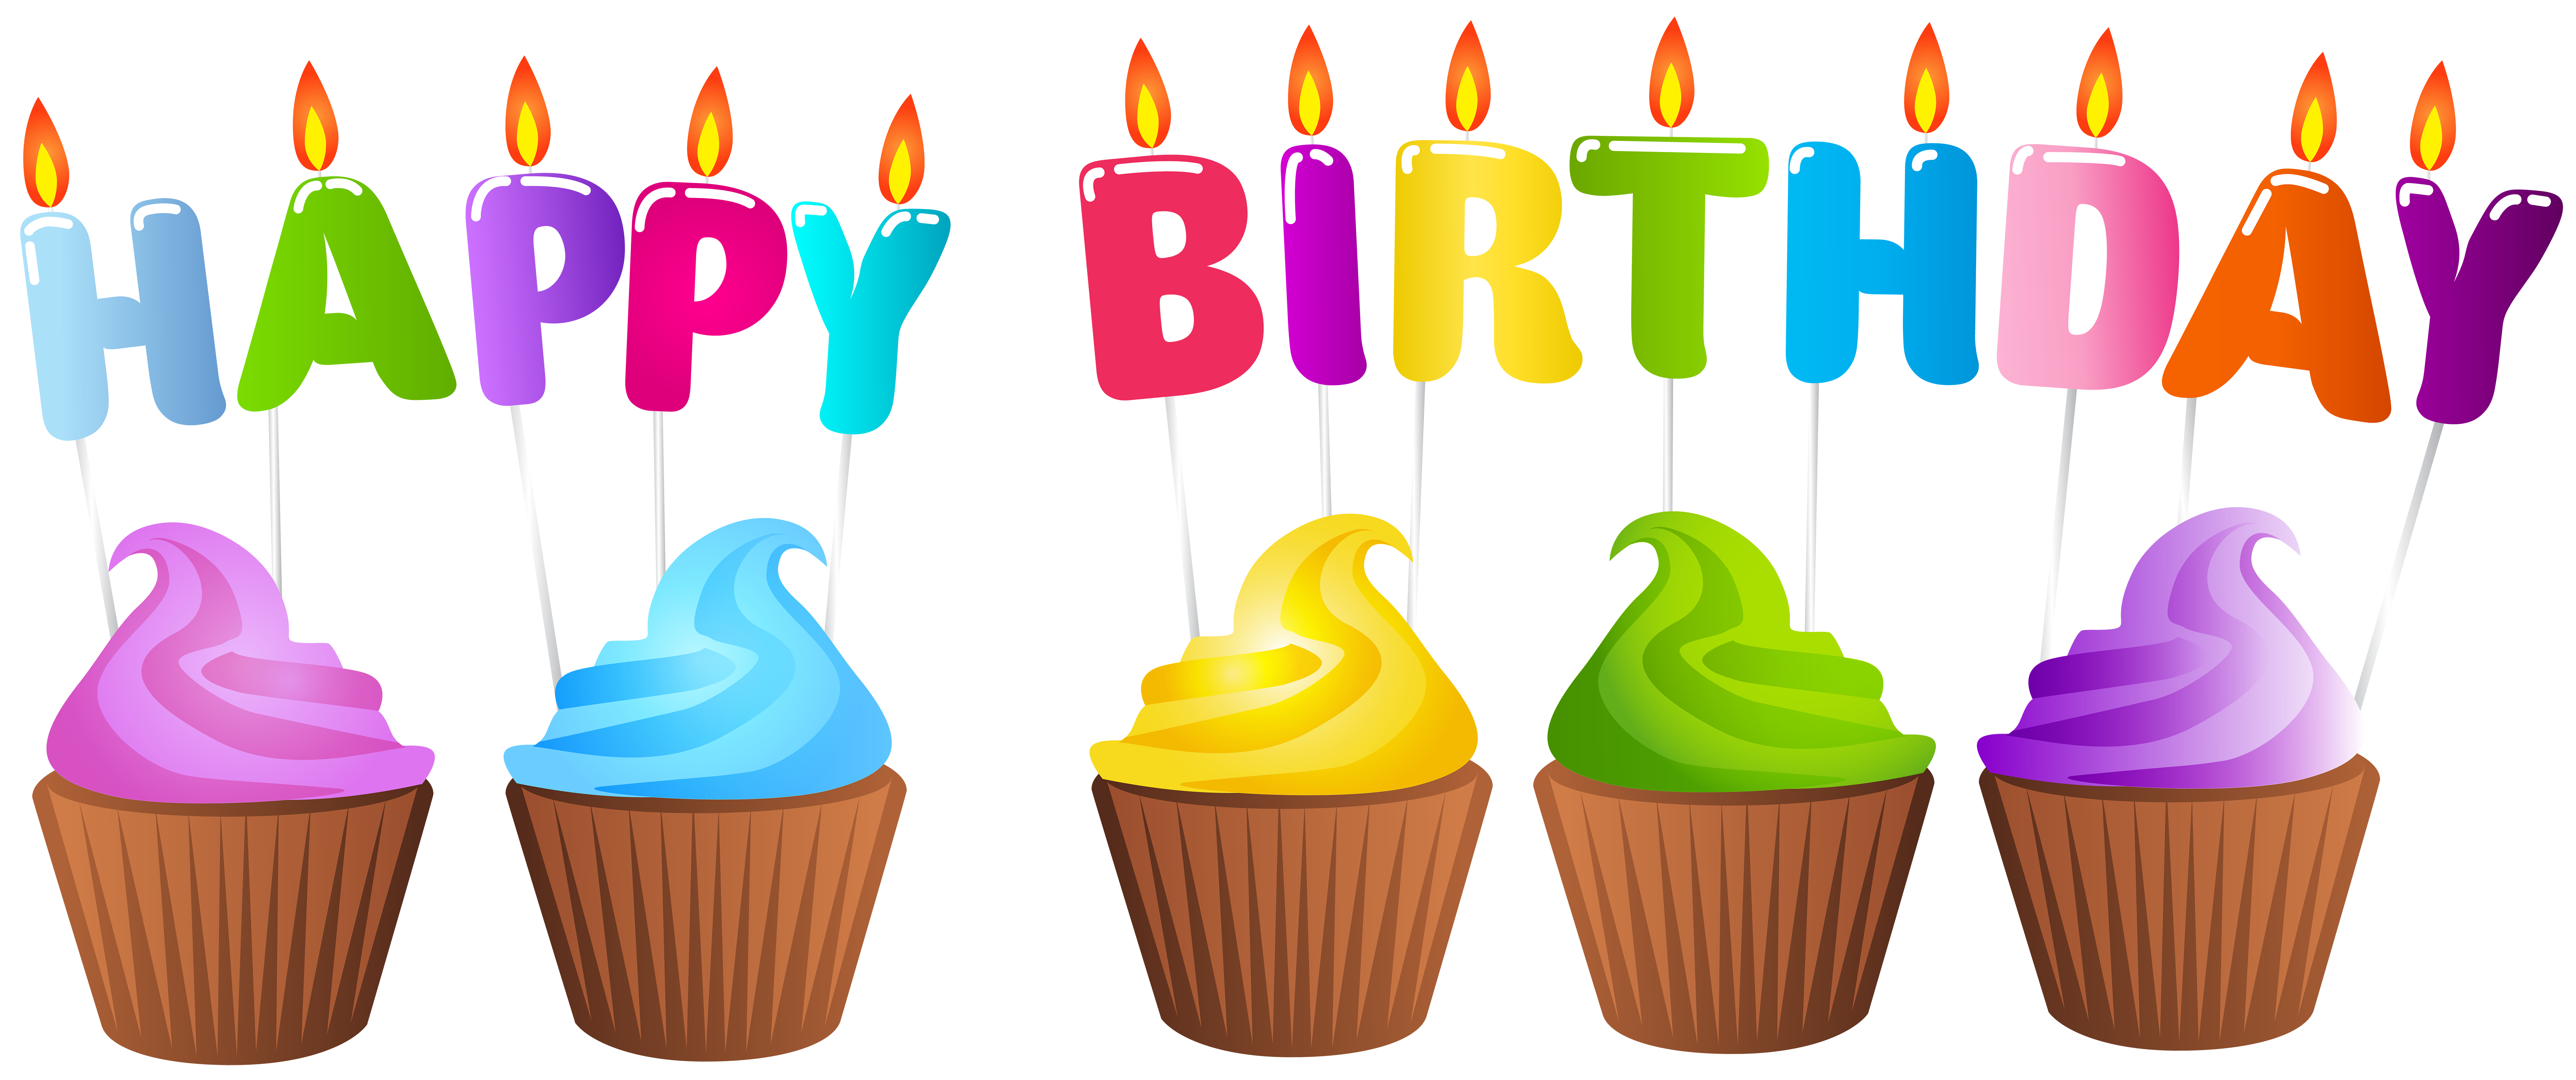 birthday-cake-cupcake-candle-clip-art-birthday-png-download-8000